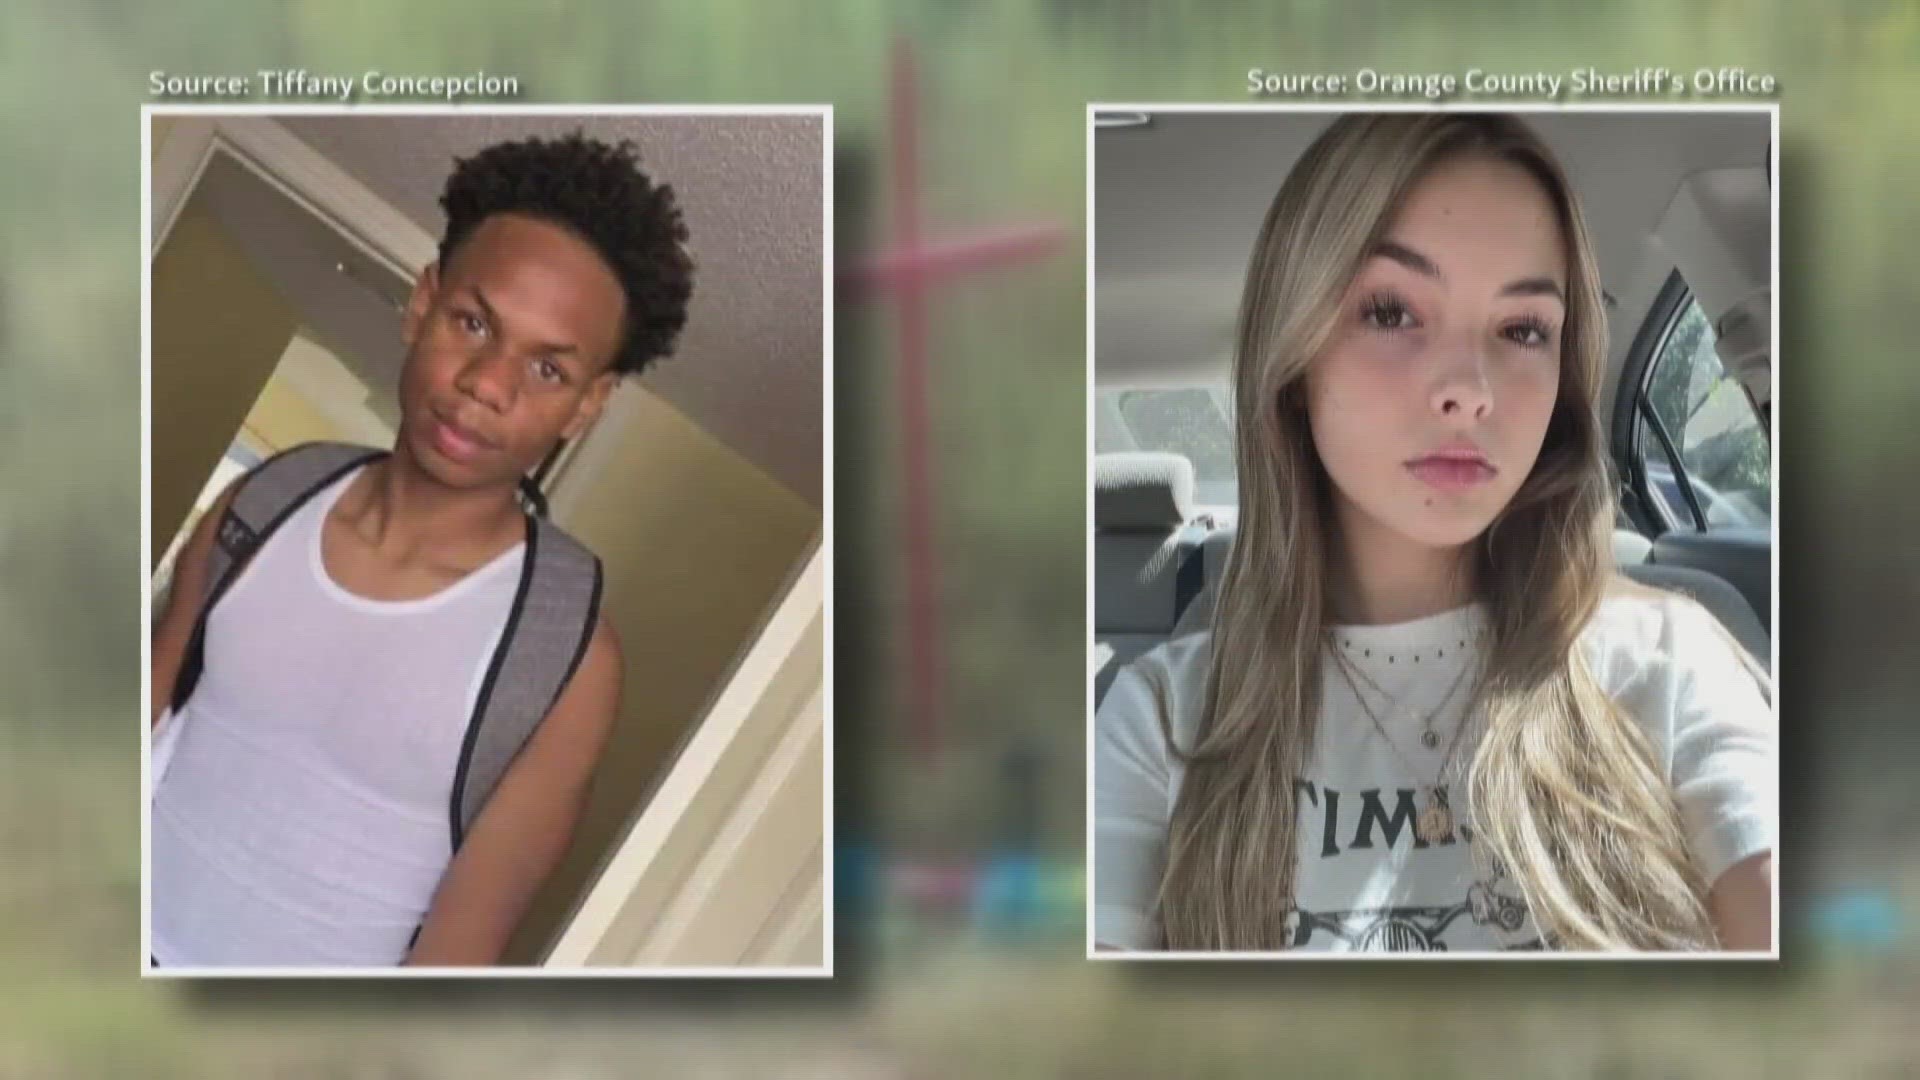 The Orange Co. Sheriff’s Office said someone vandalized a memorial for Devin Clark and Lyric Woods. The two were murdered in Hillsborough in September 2022.